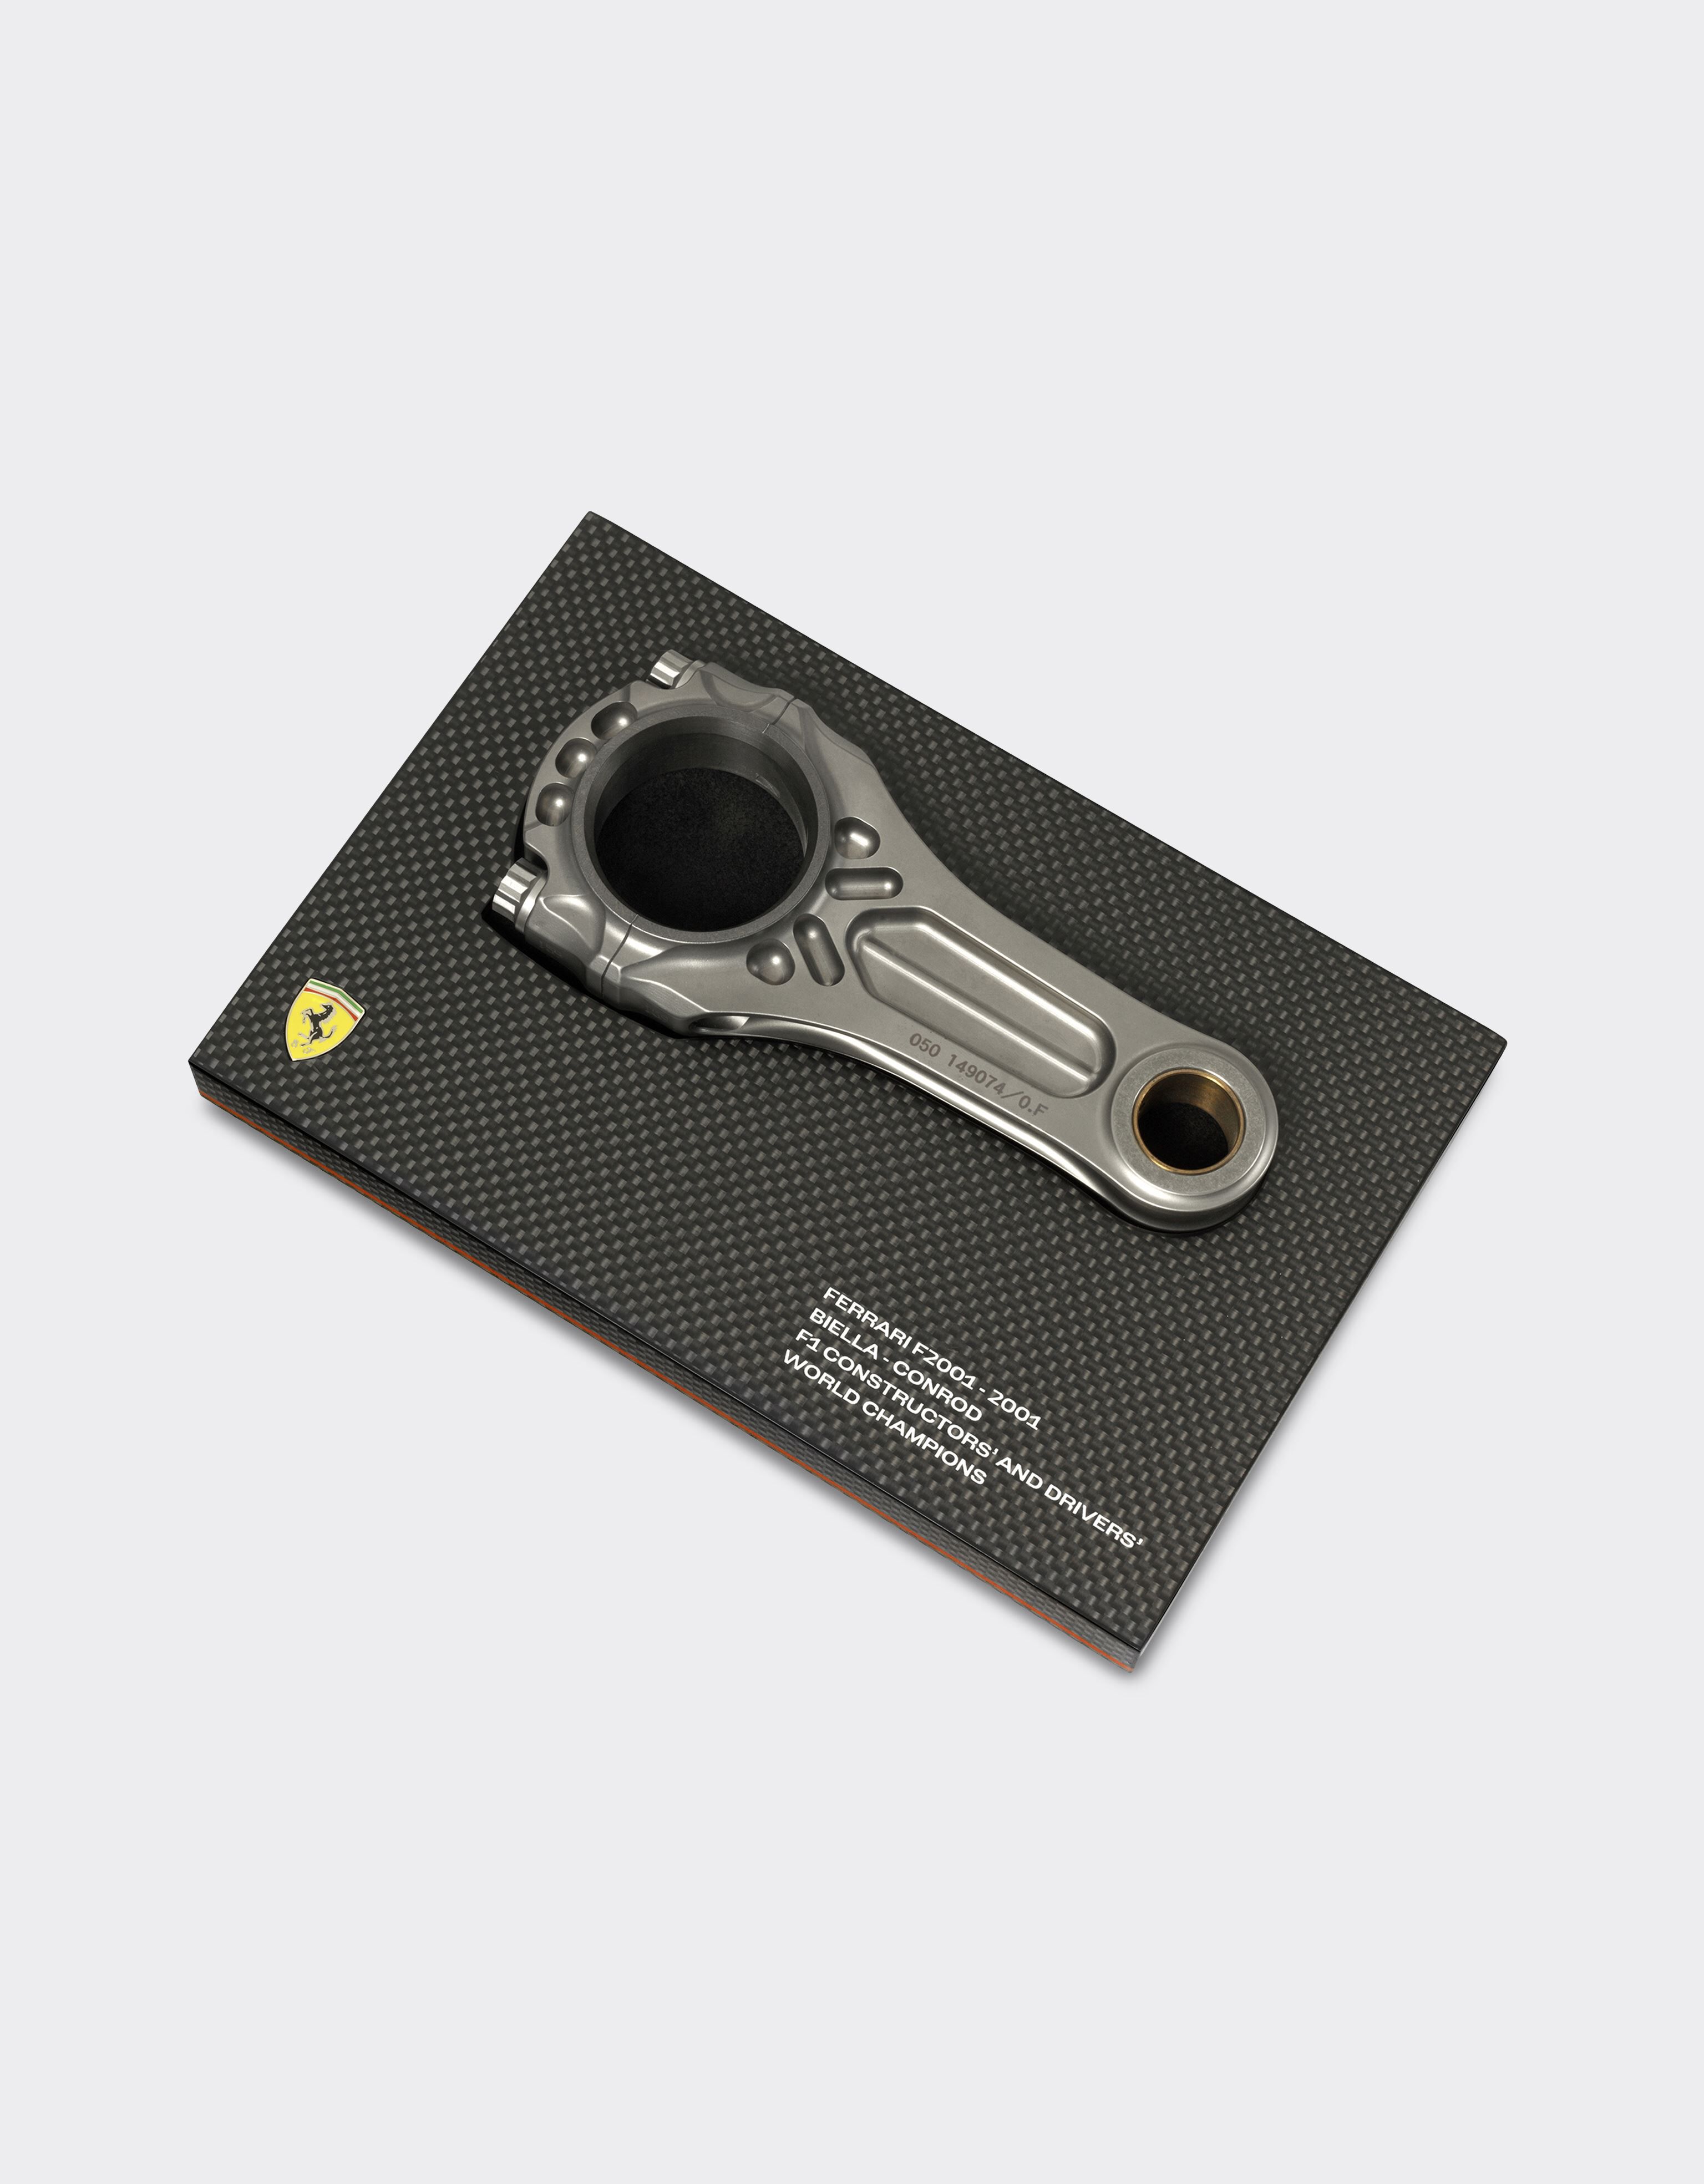 Ferrari Original connecting rod from the F2001, winner of the 2001 Constructors' and Drivers' Championships MULTICOLOUR F1069f